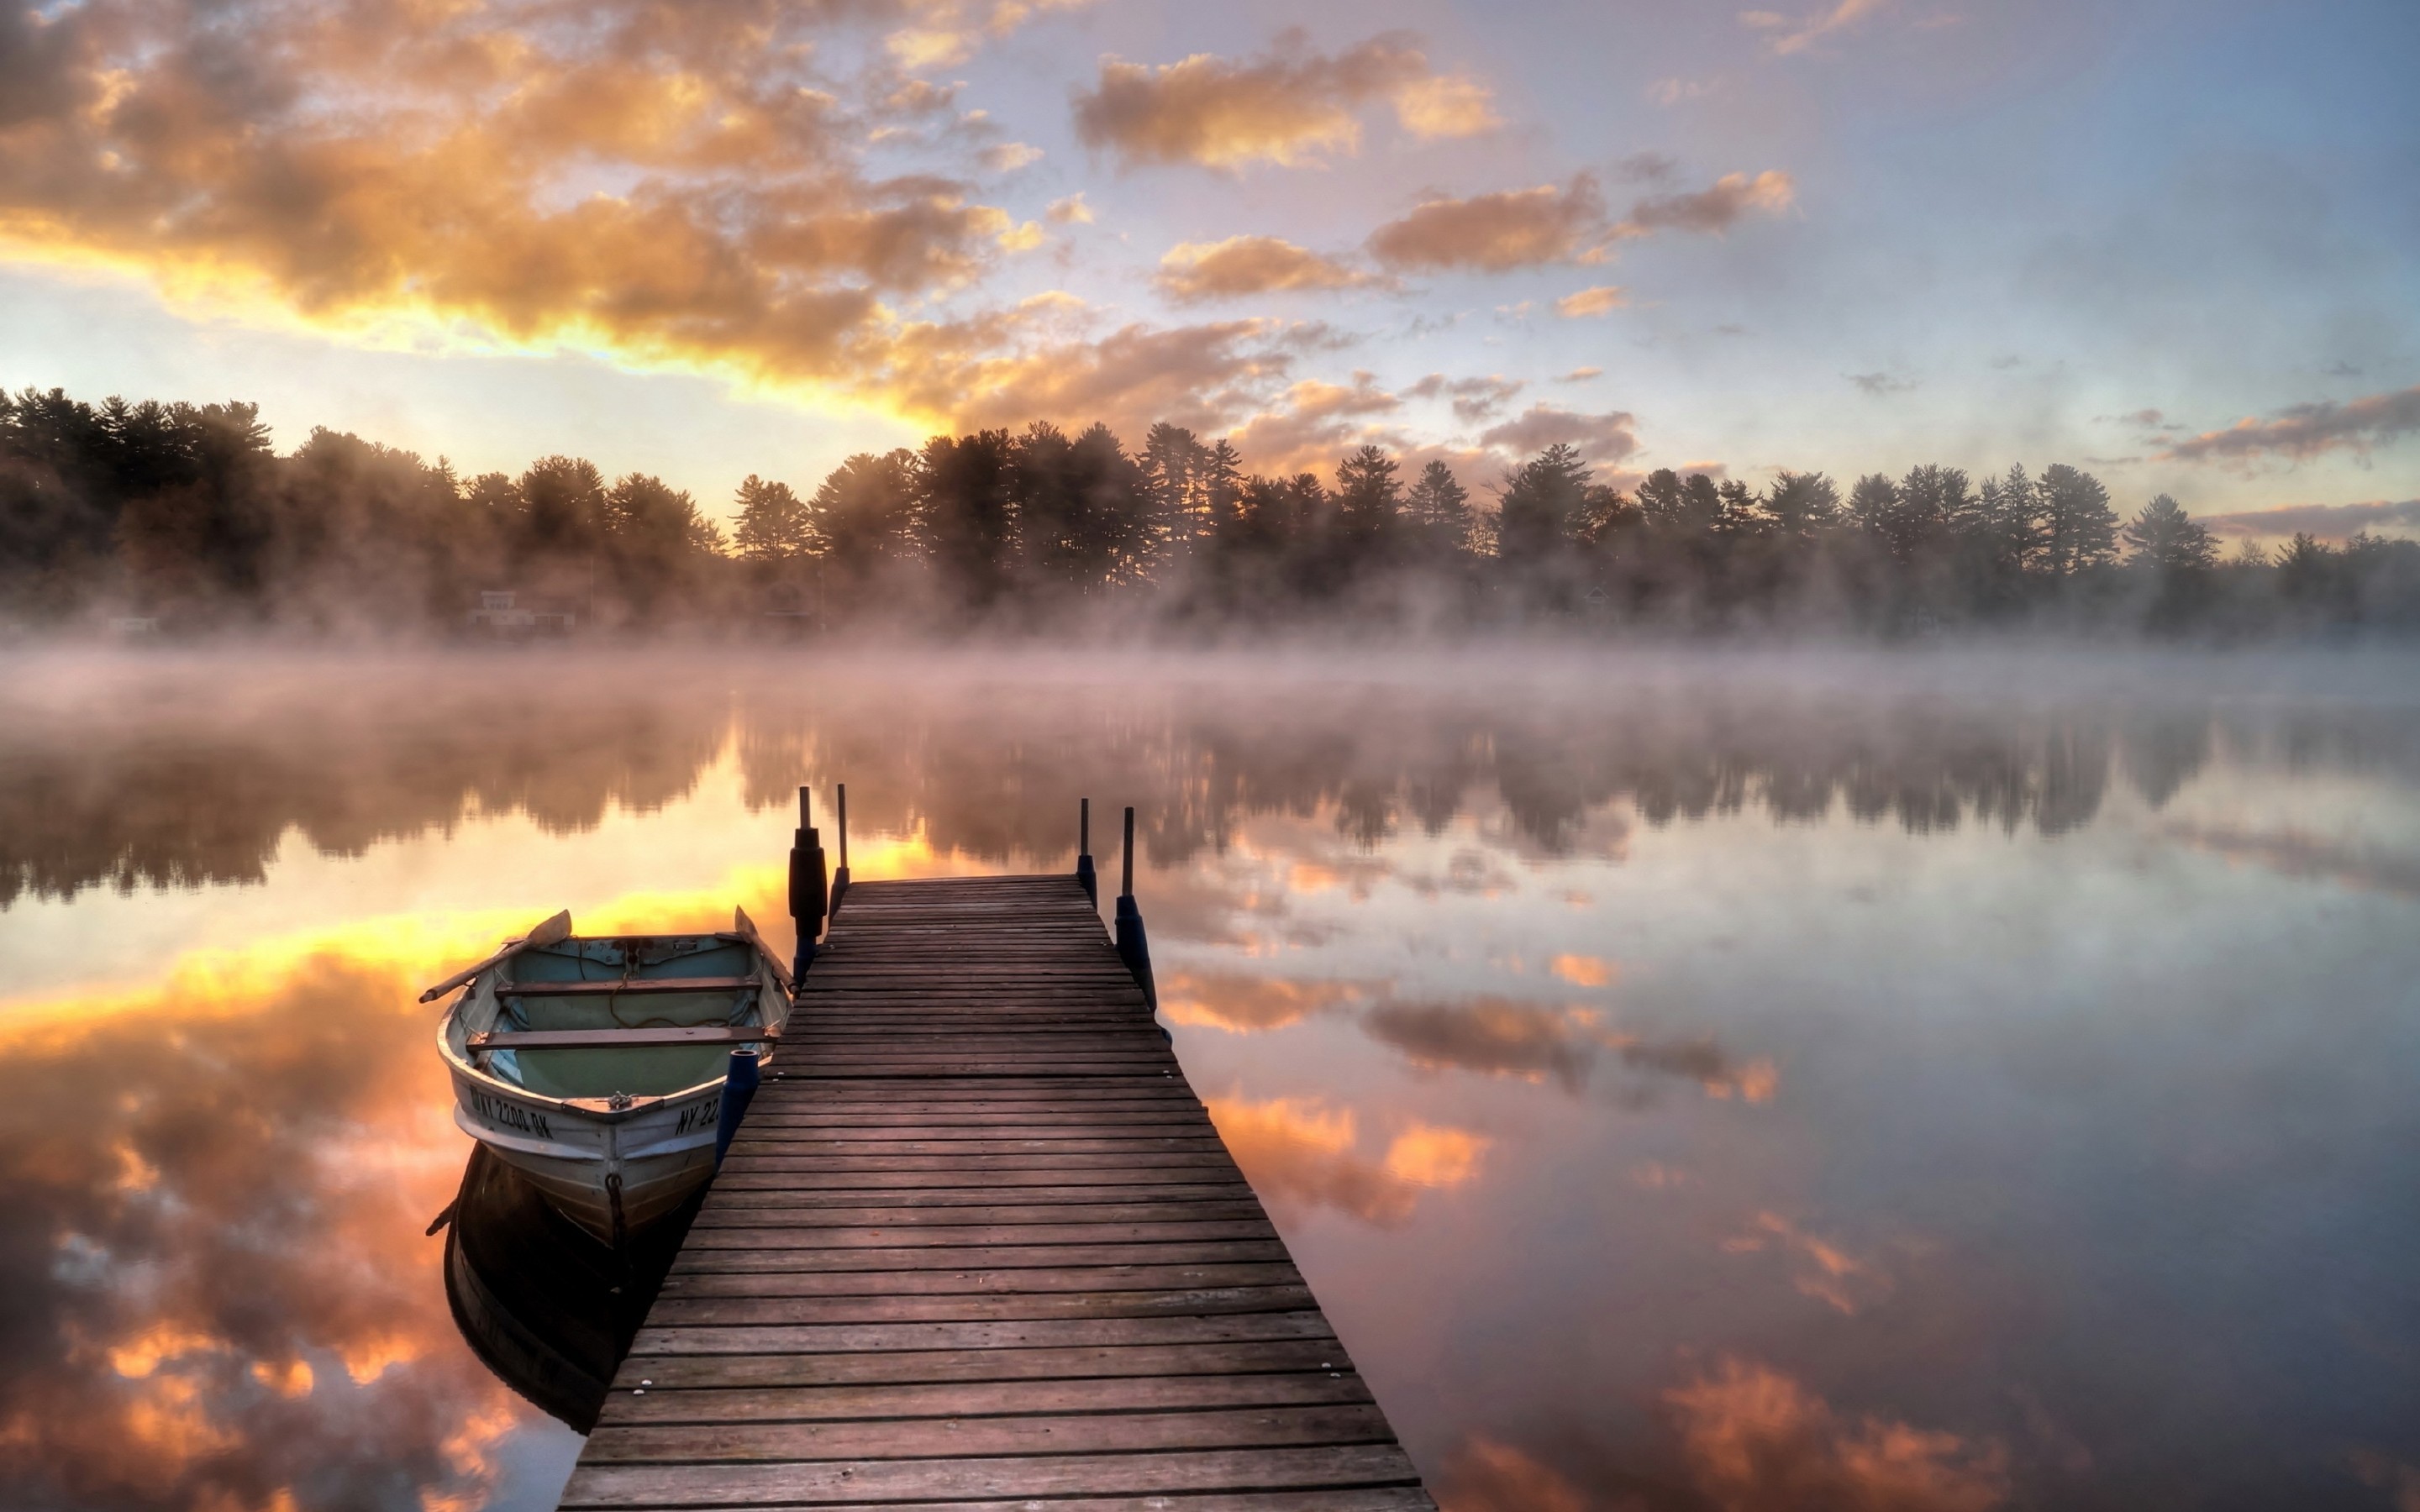 Lake Pier Mist Boat Planks Calm Calm Waters Nature 2880x1800